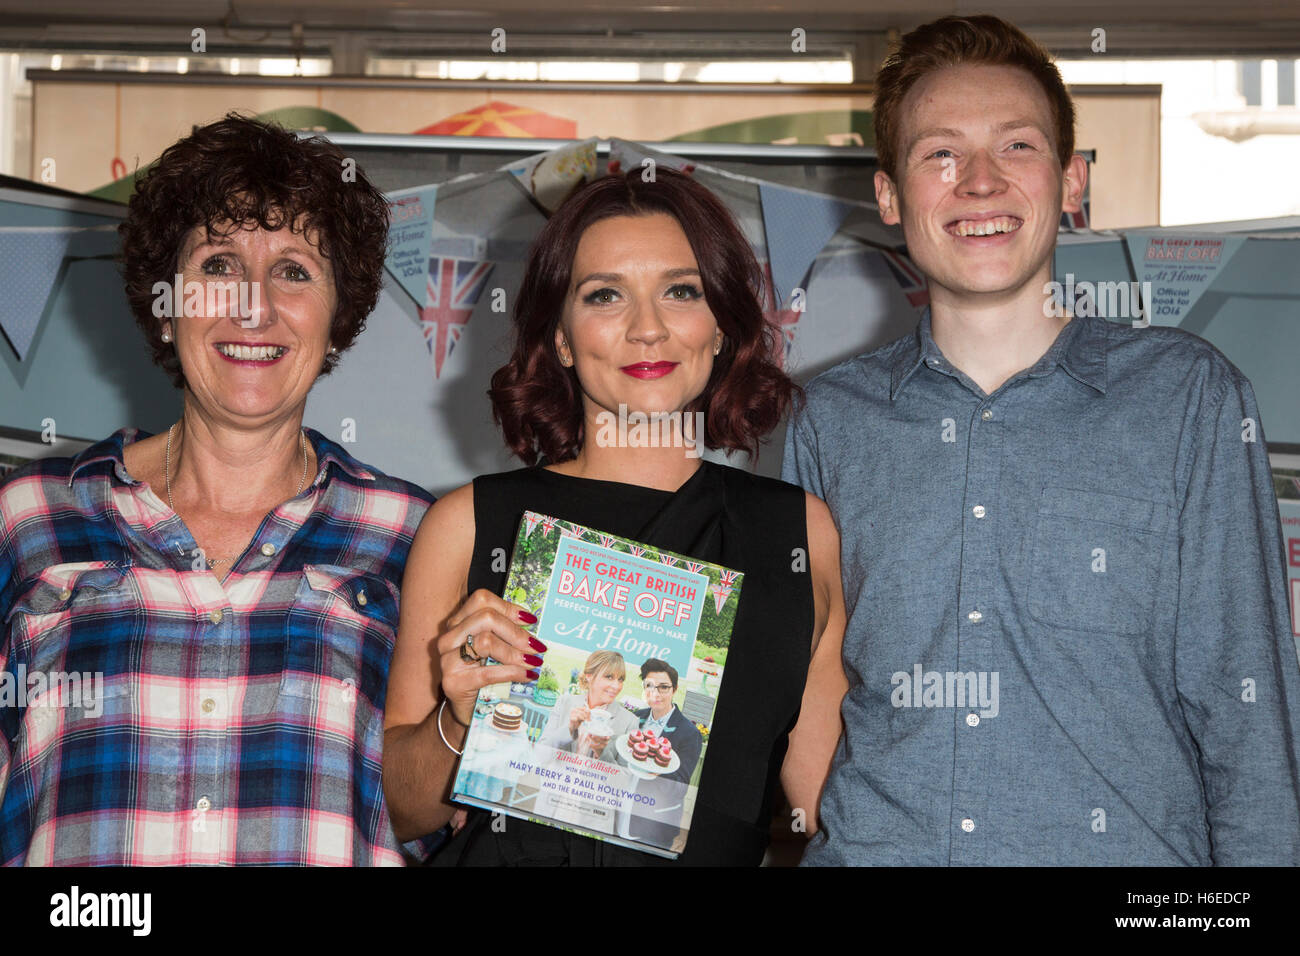 London, UK. 27 October 2016. L-R: Jane Beedle, Candice Brown and Andrew Smyth. The Great British Bake Off finalists Jane Beedle, Candice Brown and Andrew Smyth attend a book-signing of the TV tie-in recipe book at Waterstones in Piccadilly. The 2016 series was won by Candice Brown with Jane Beedle and Andrew Smyth being the runners-up. Stock Photo